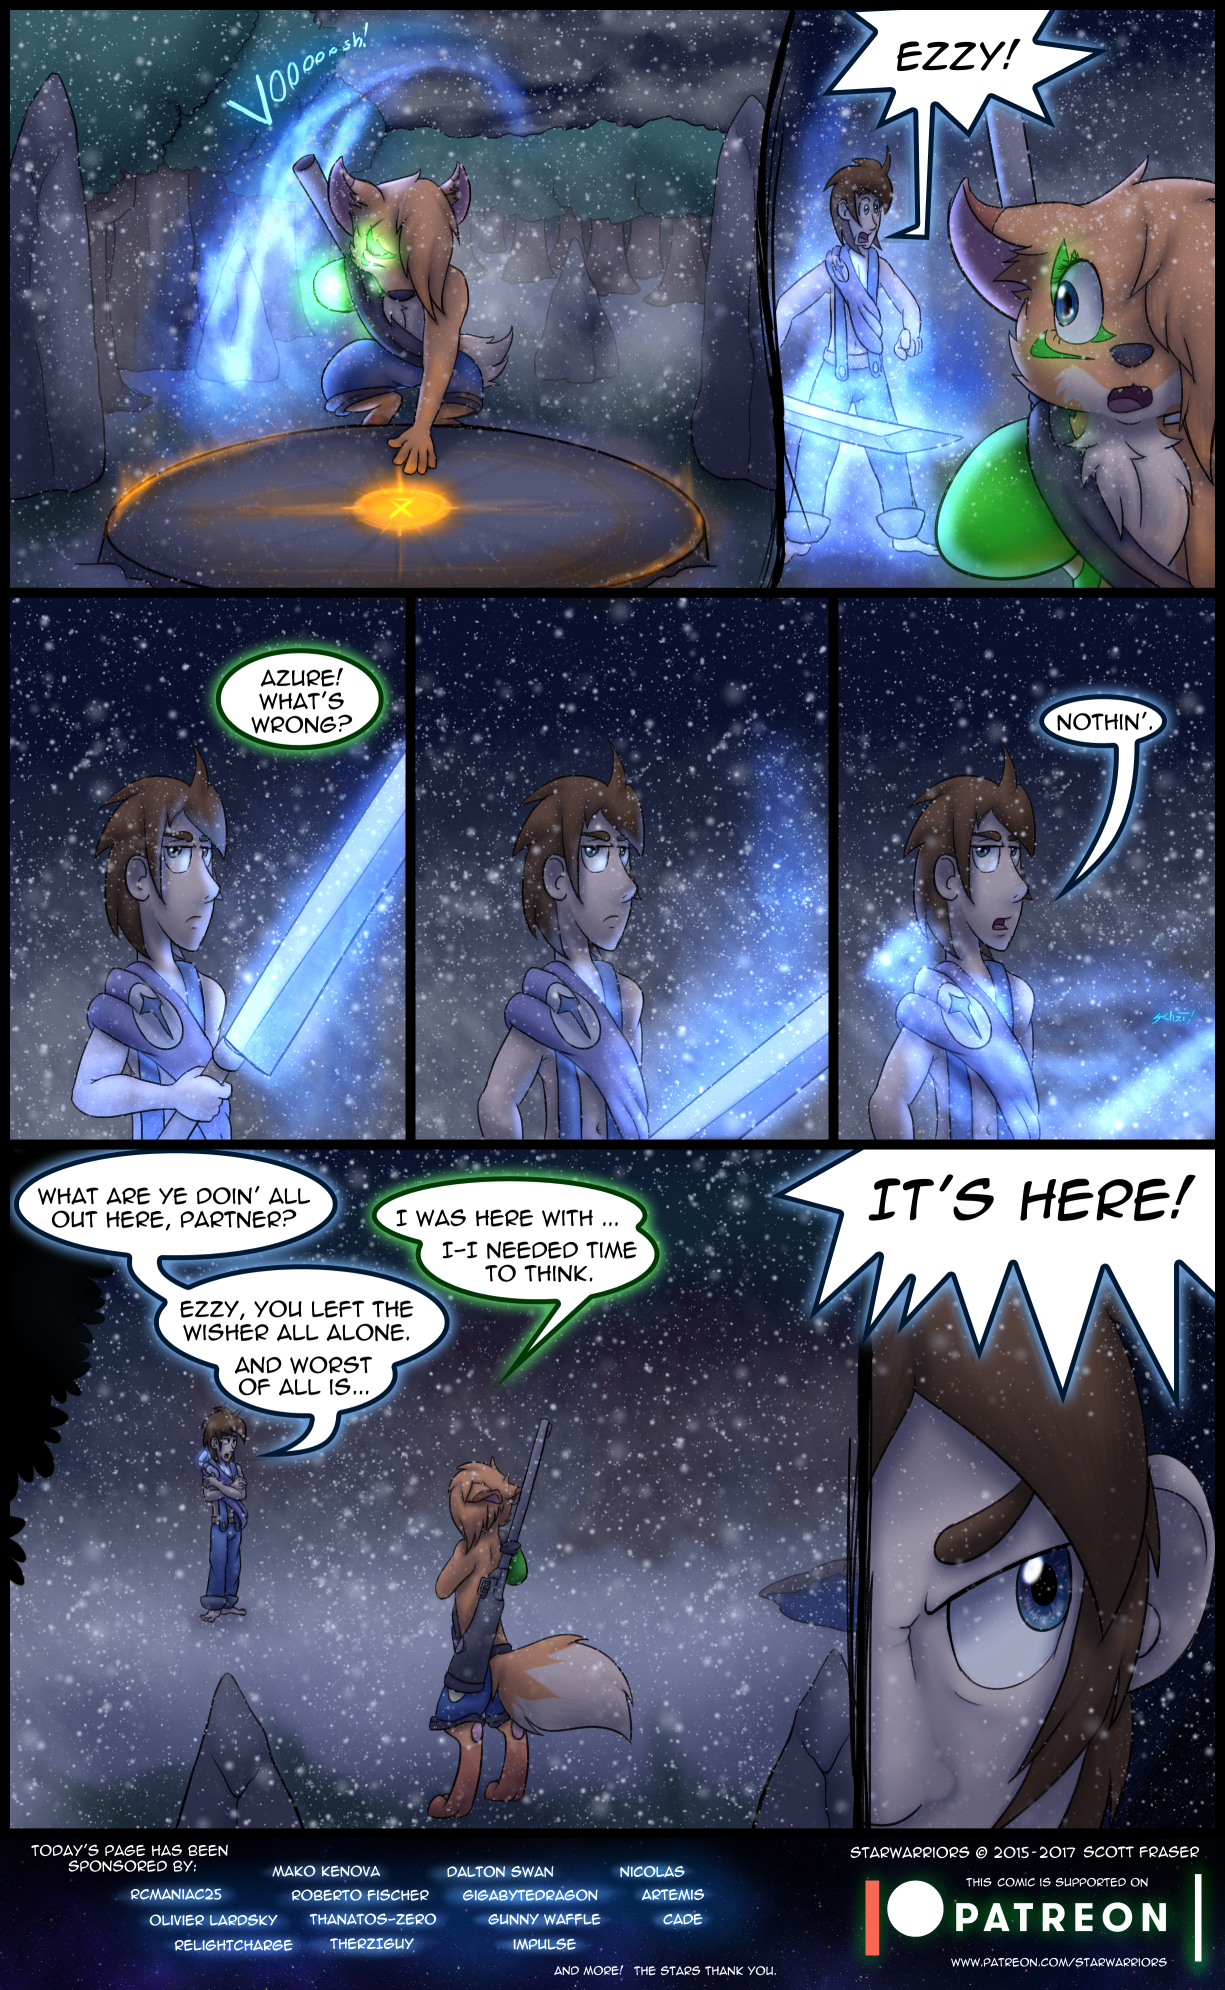 Ch3 Page 16 – Reunited